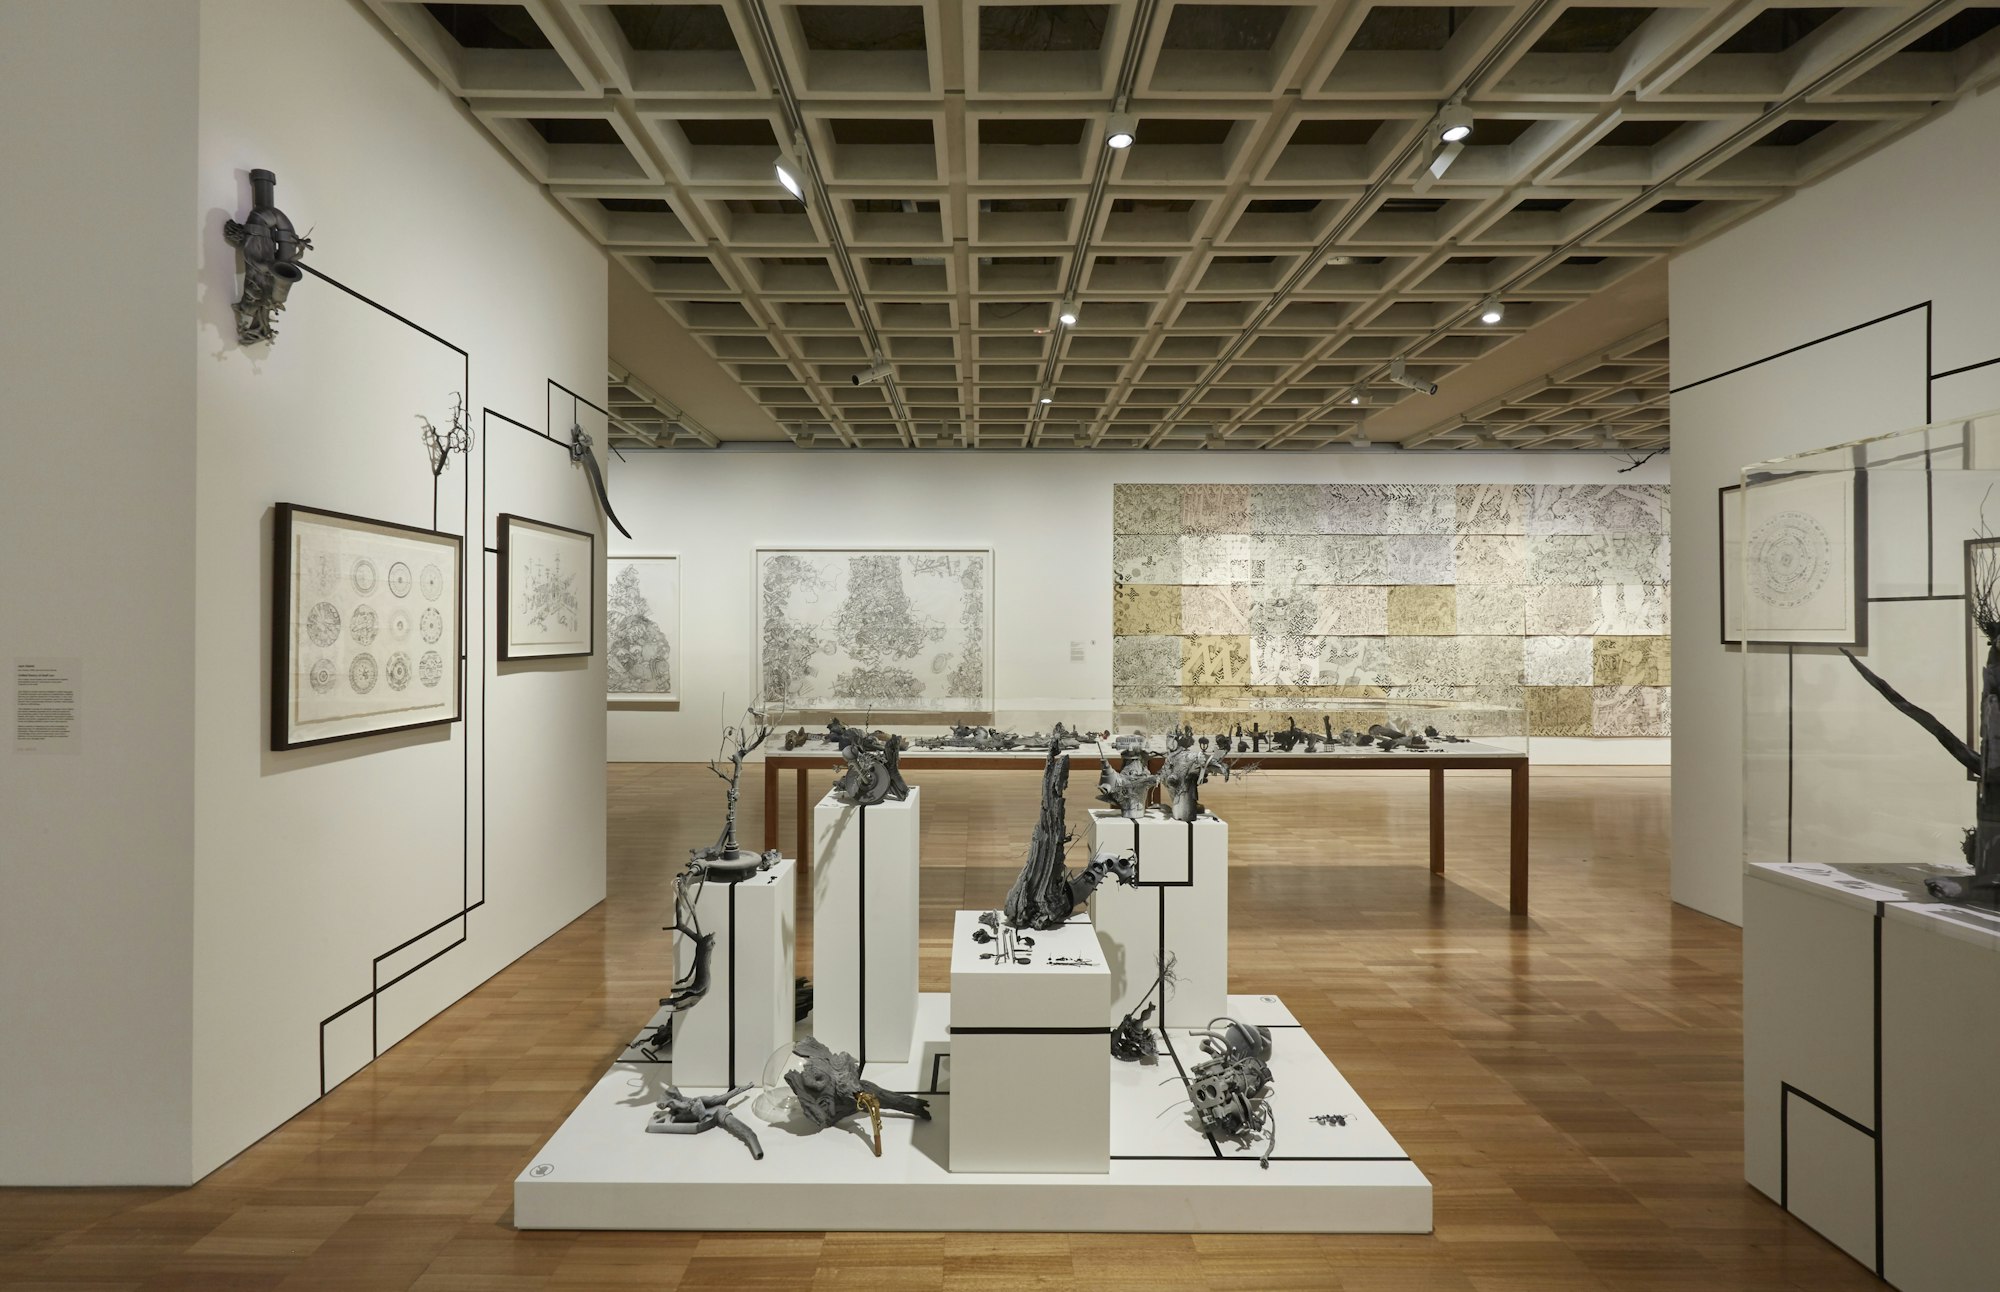 Large white-walled gallery space with drawings hanging on walls and multiple objects on plinths.